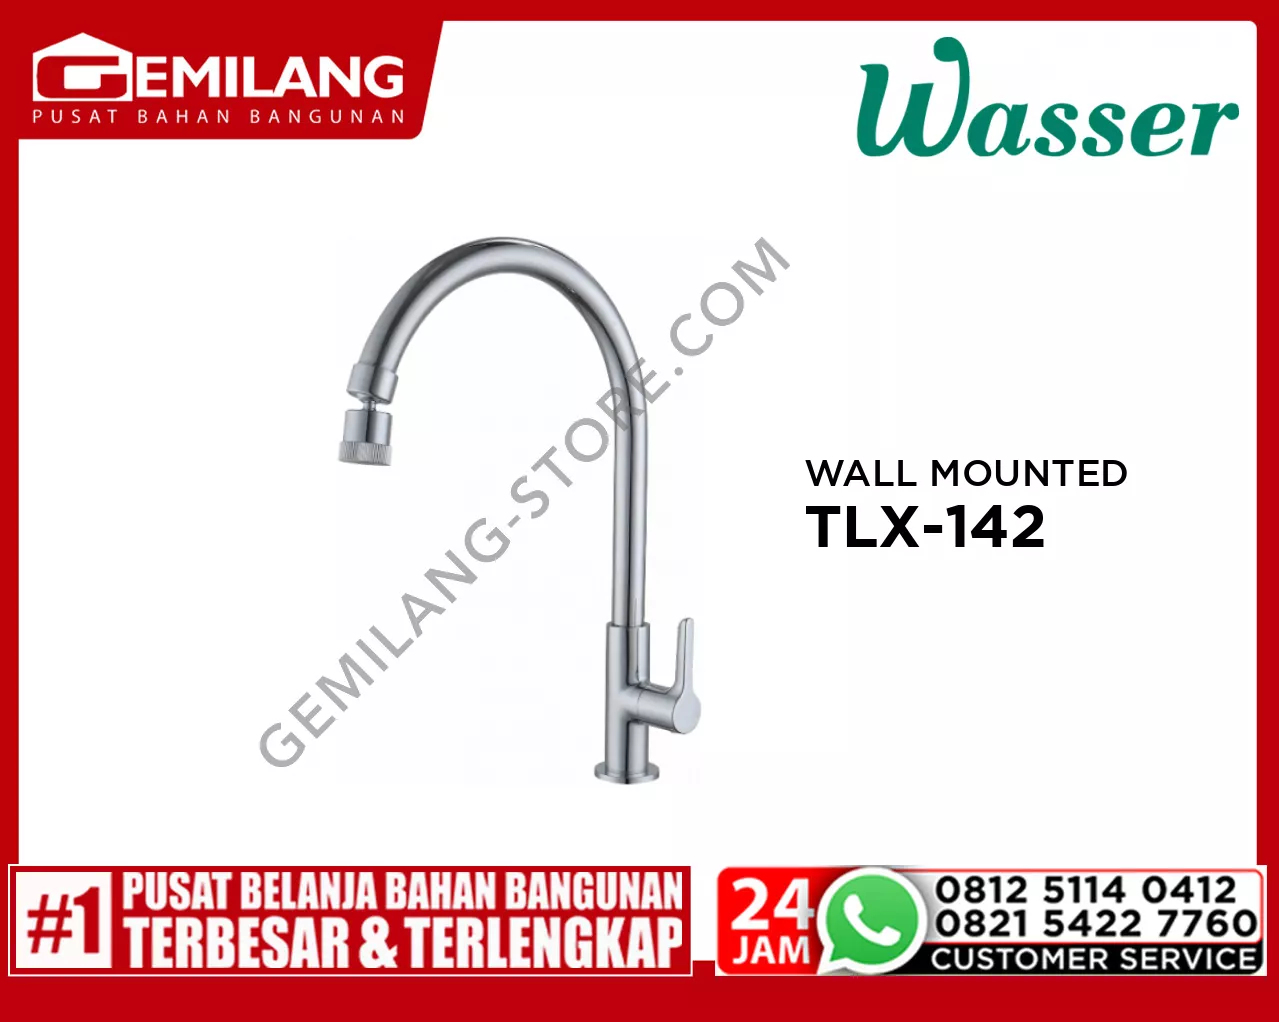 WASSER WALL MOUNTED KITCHEN TAP TLX-142